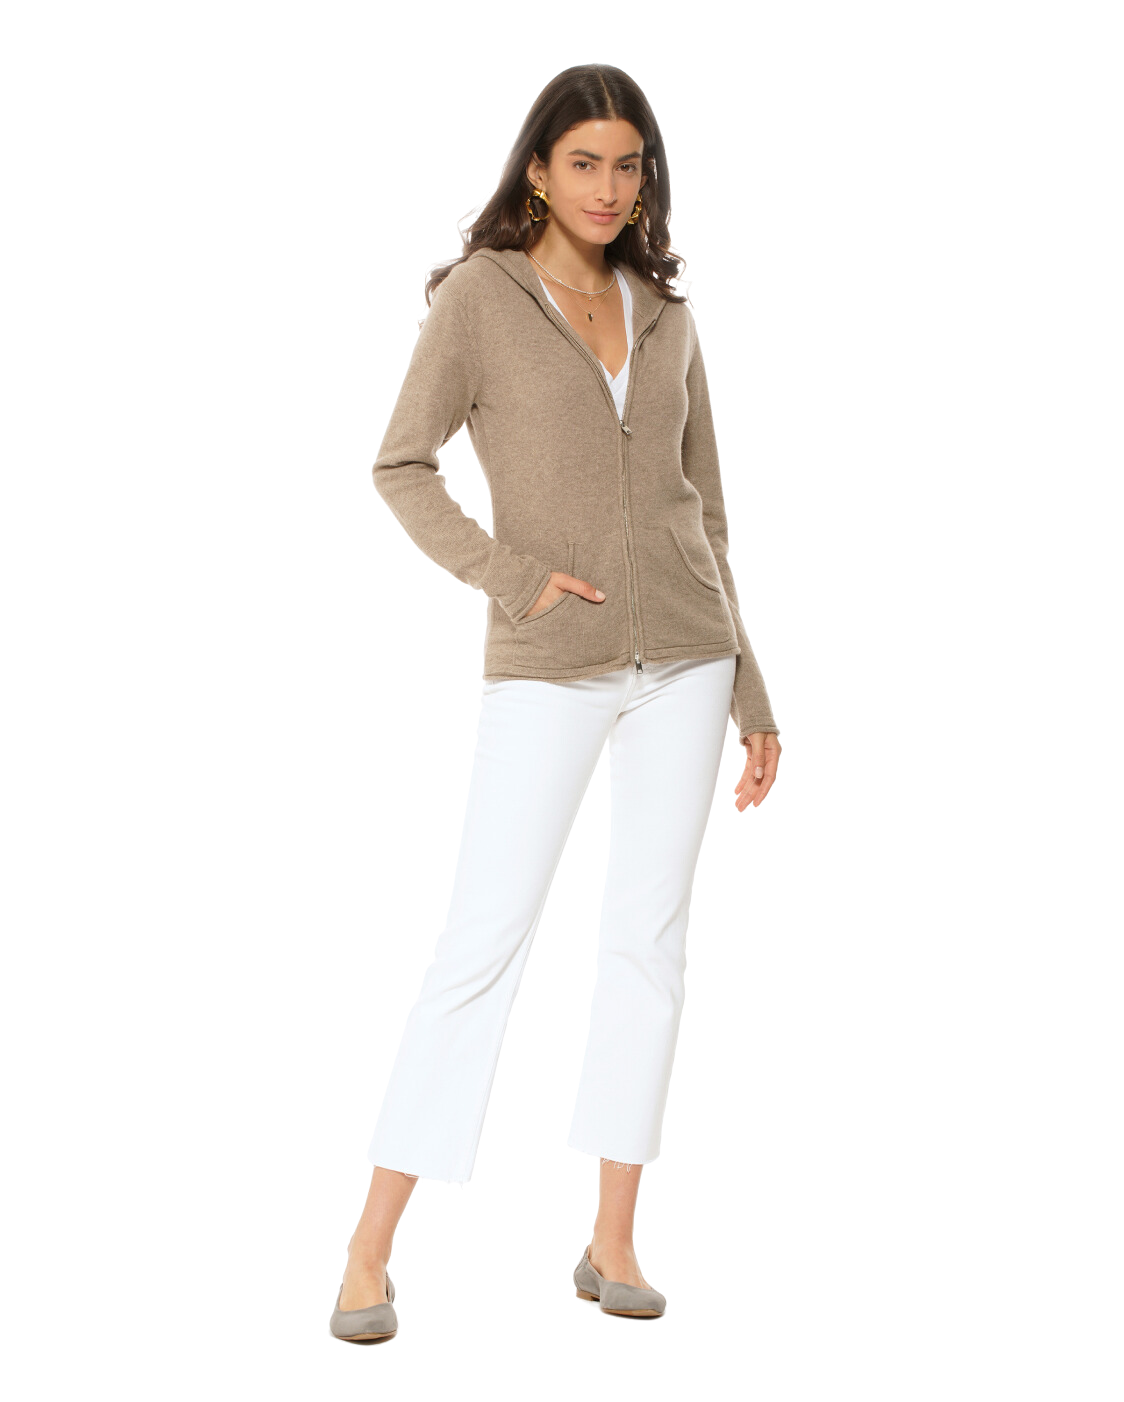 Monticelli Women's Pure Cashmere Hoodie Sweater Camel  5